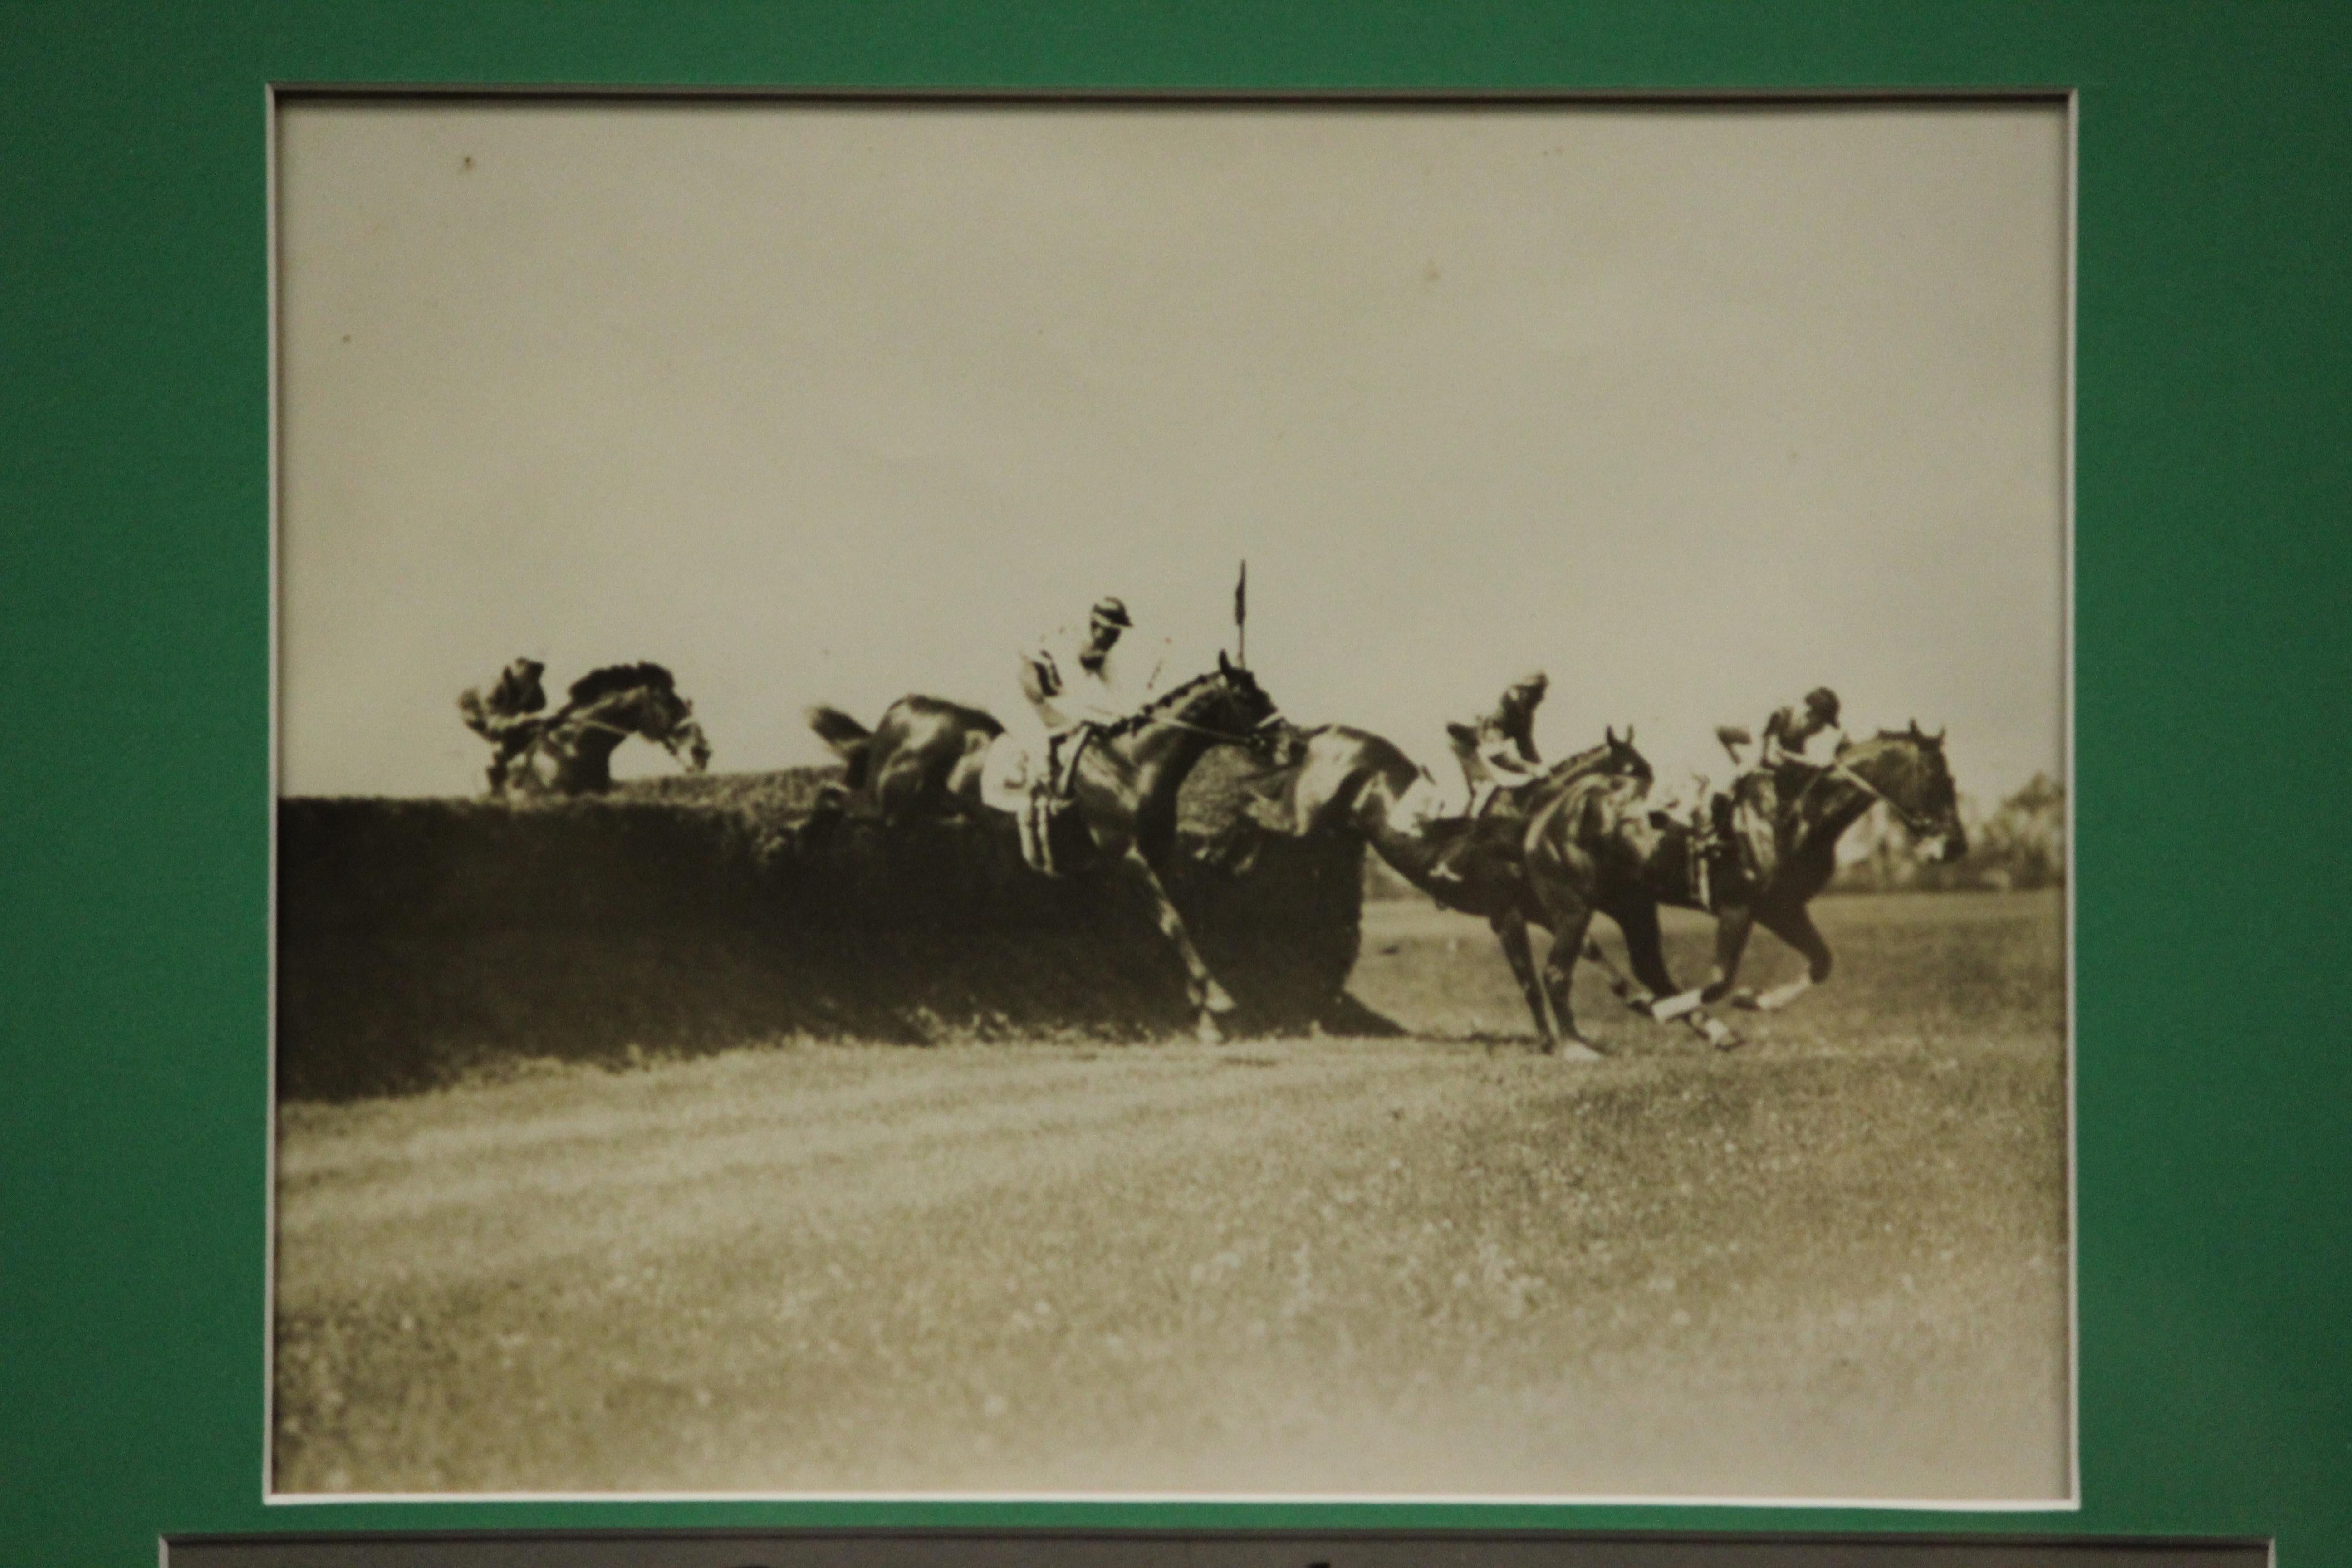 Original C.C Cook b&w framed photo dated May 23, 1929 at Belmont Park of the Westbury Steeplechase featuring gentleman jockey, G. H (Pete) Bostwick aboard Darkness

Photo Sz: 7 1/4